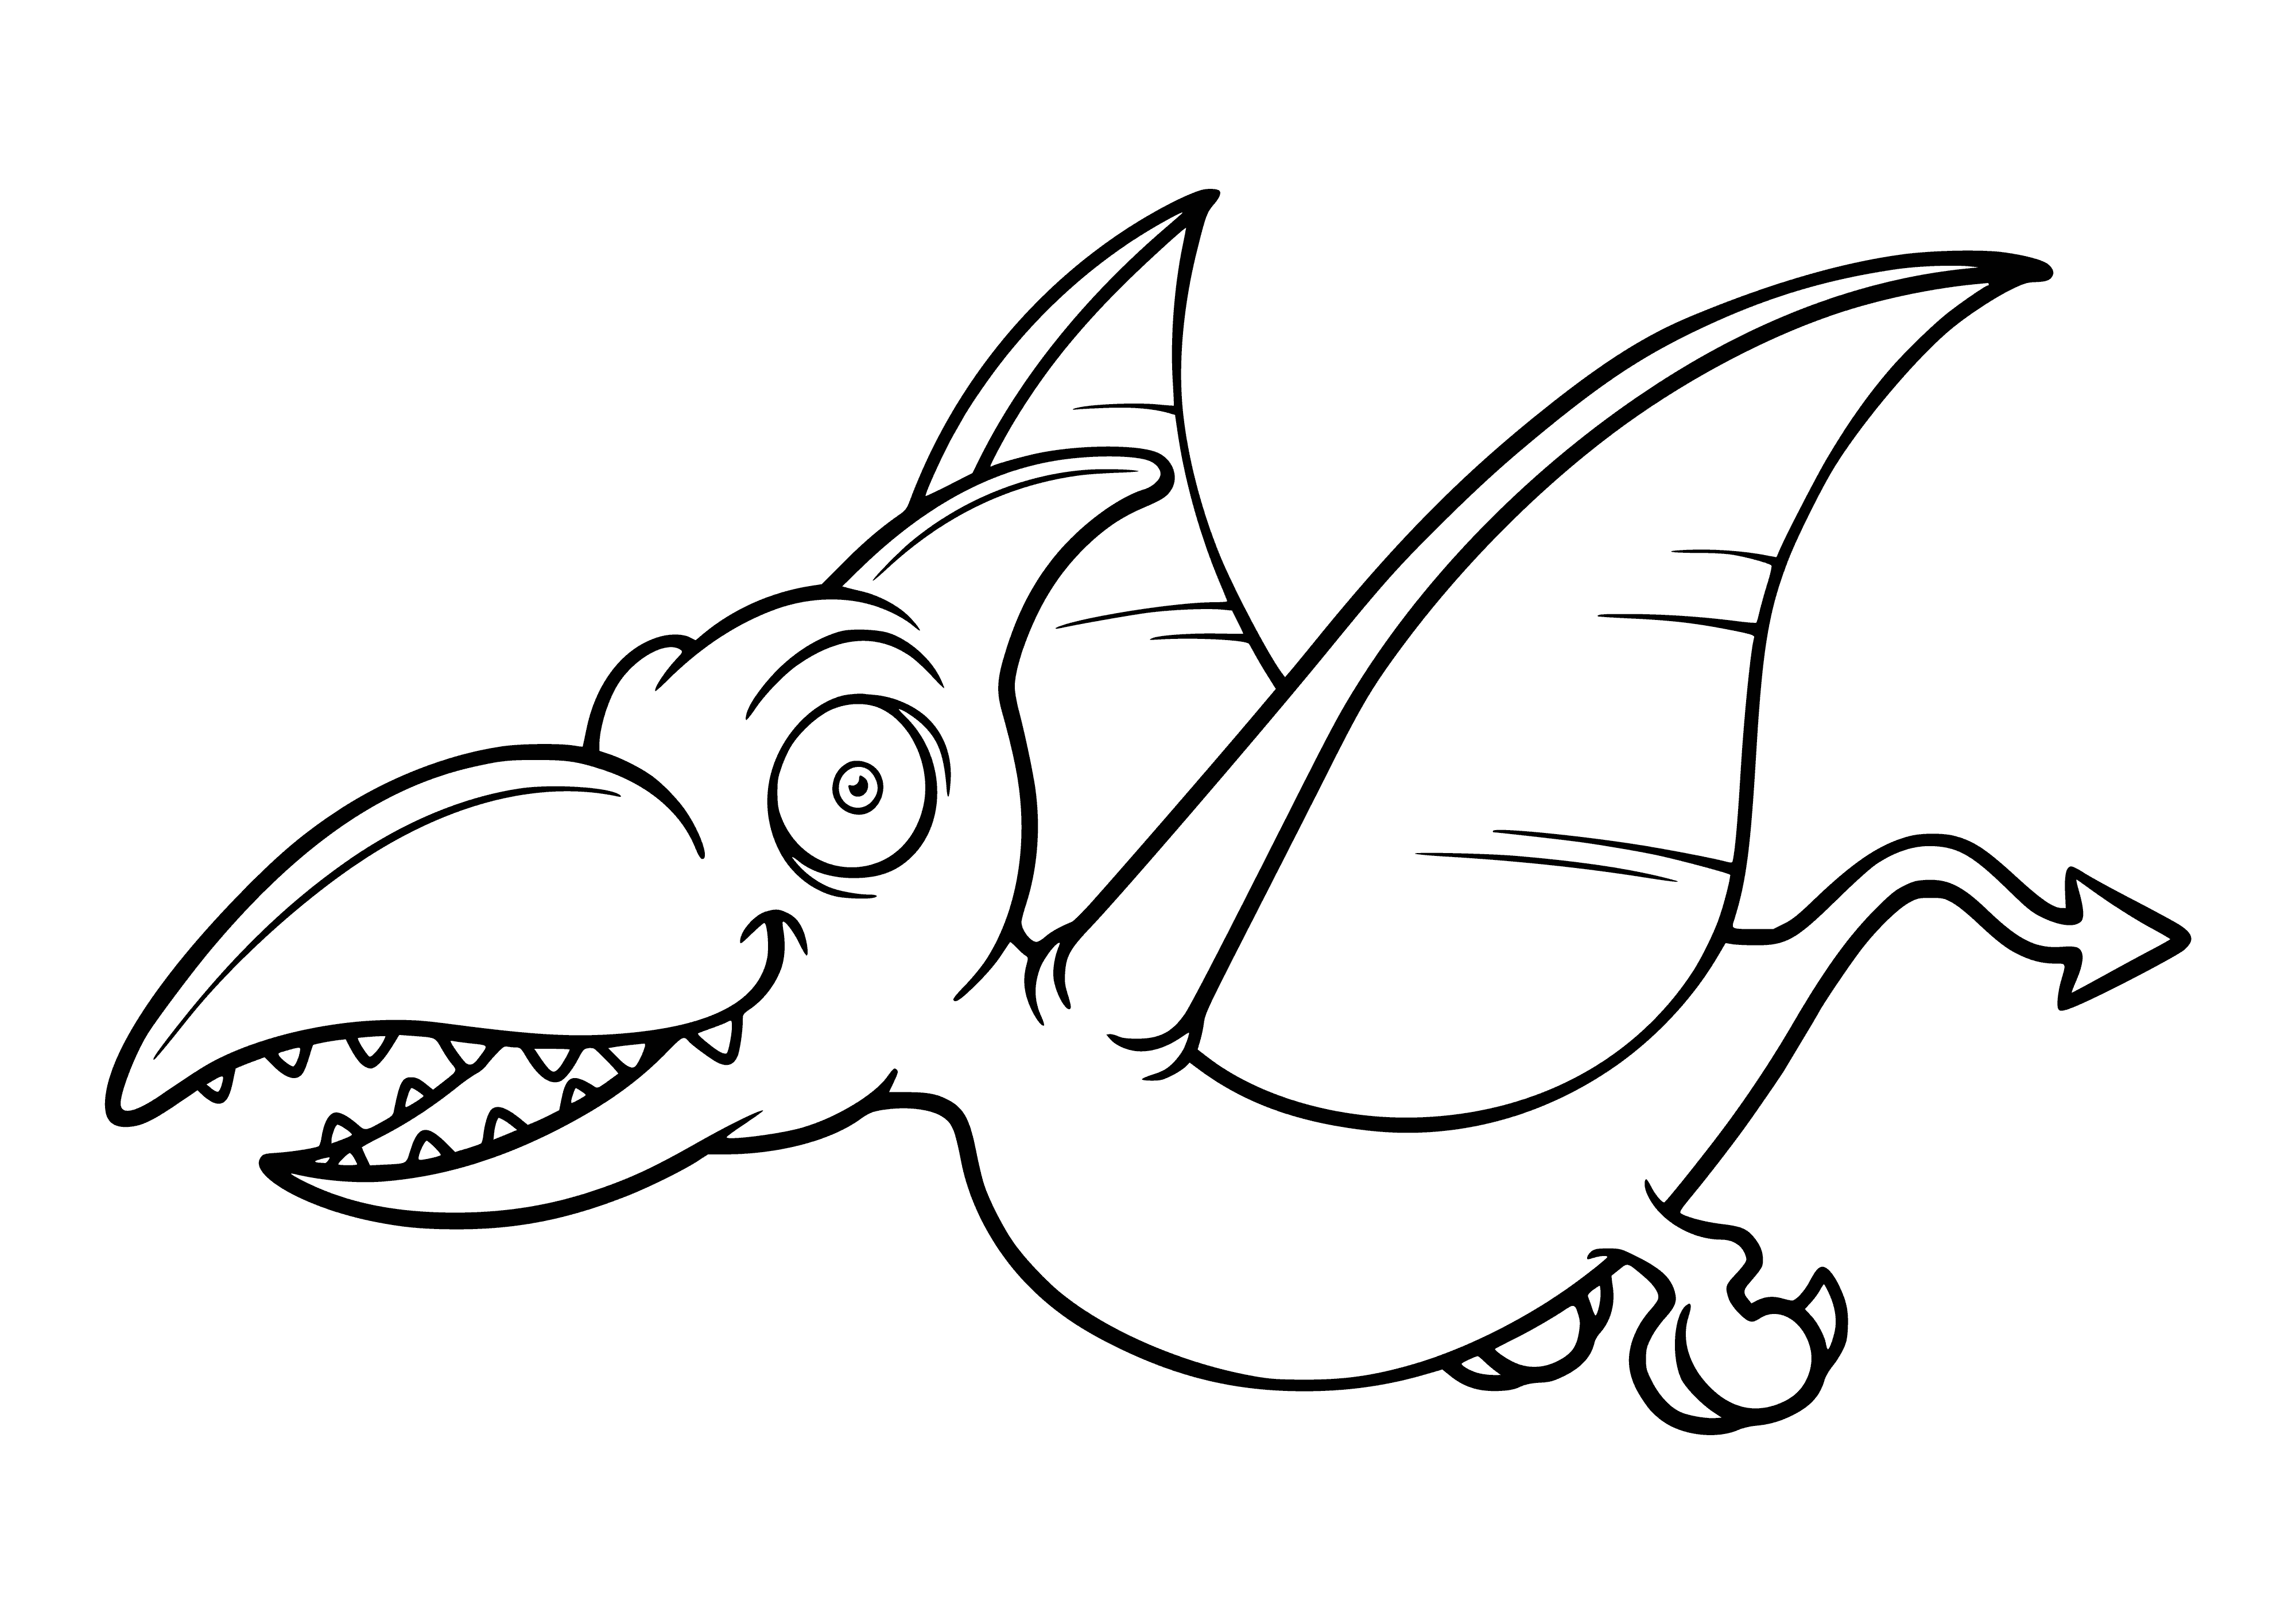 coloring page: large flying reptile with long beak, sharp teeth, and membranous wings; small body and long thin legs, gray with black stripes on wings.